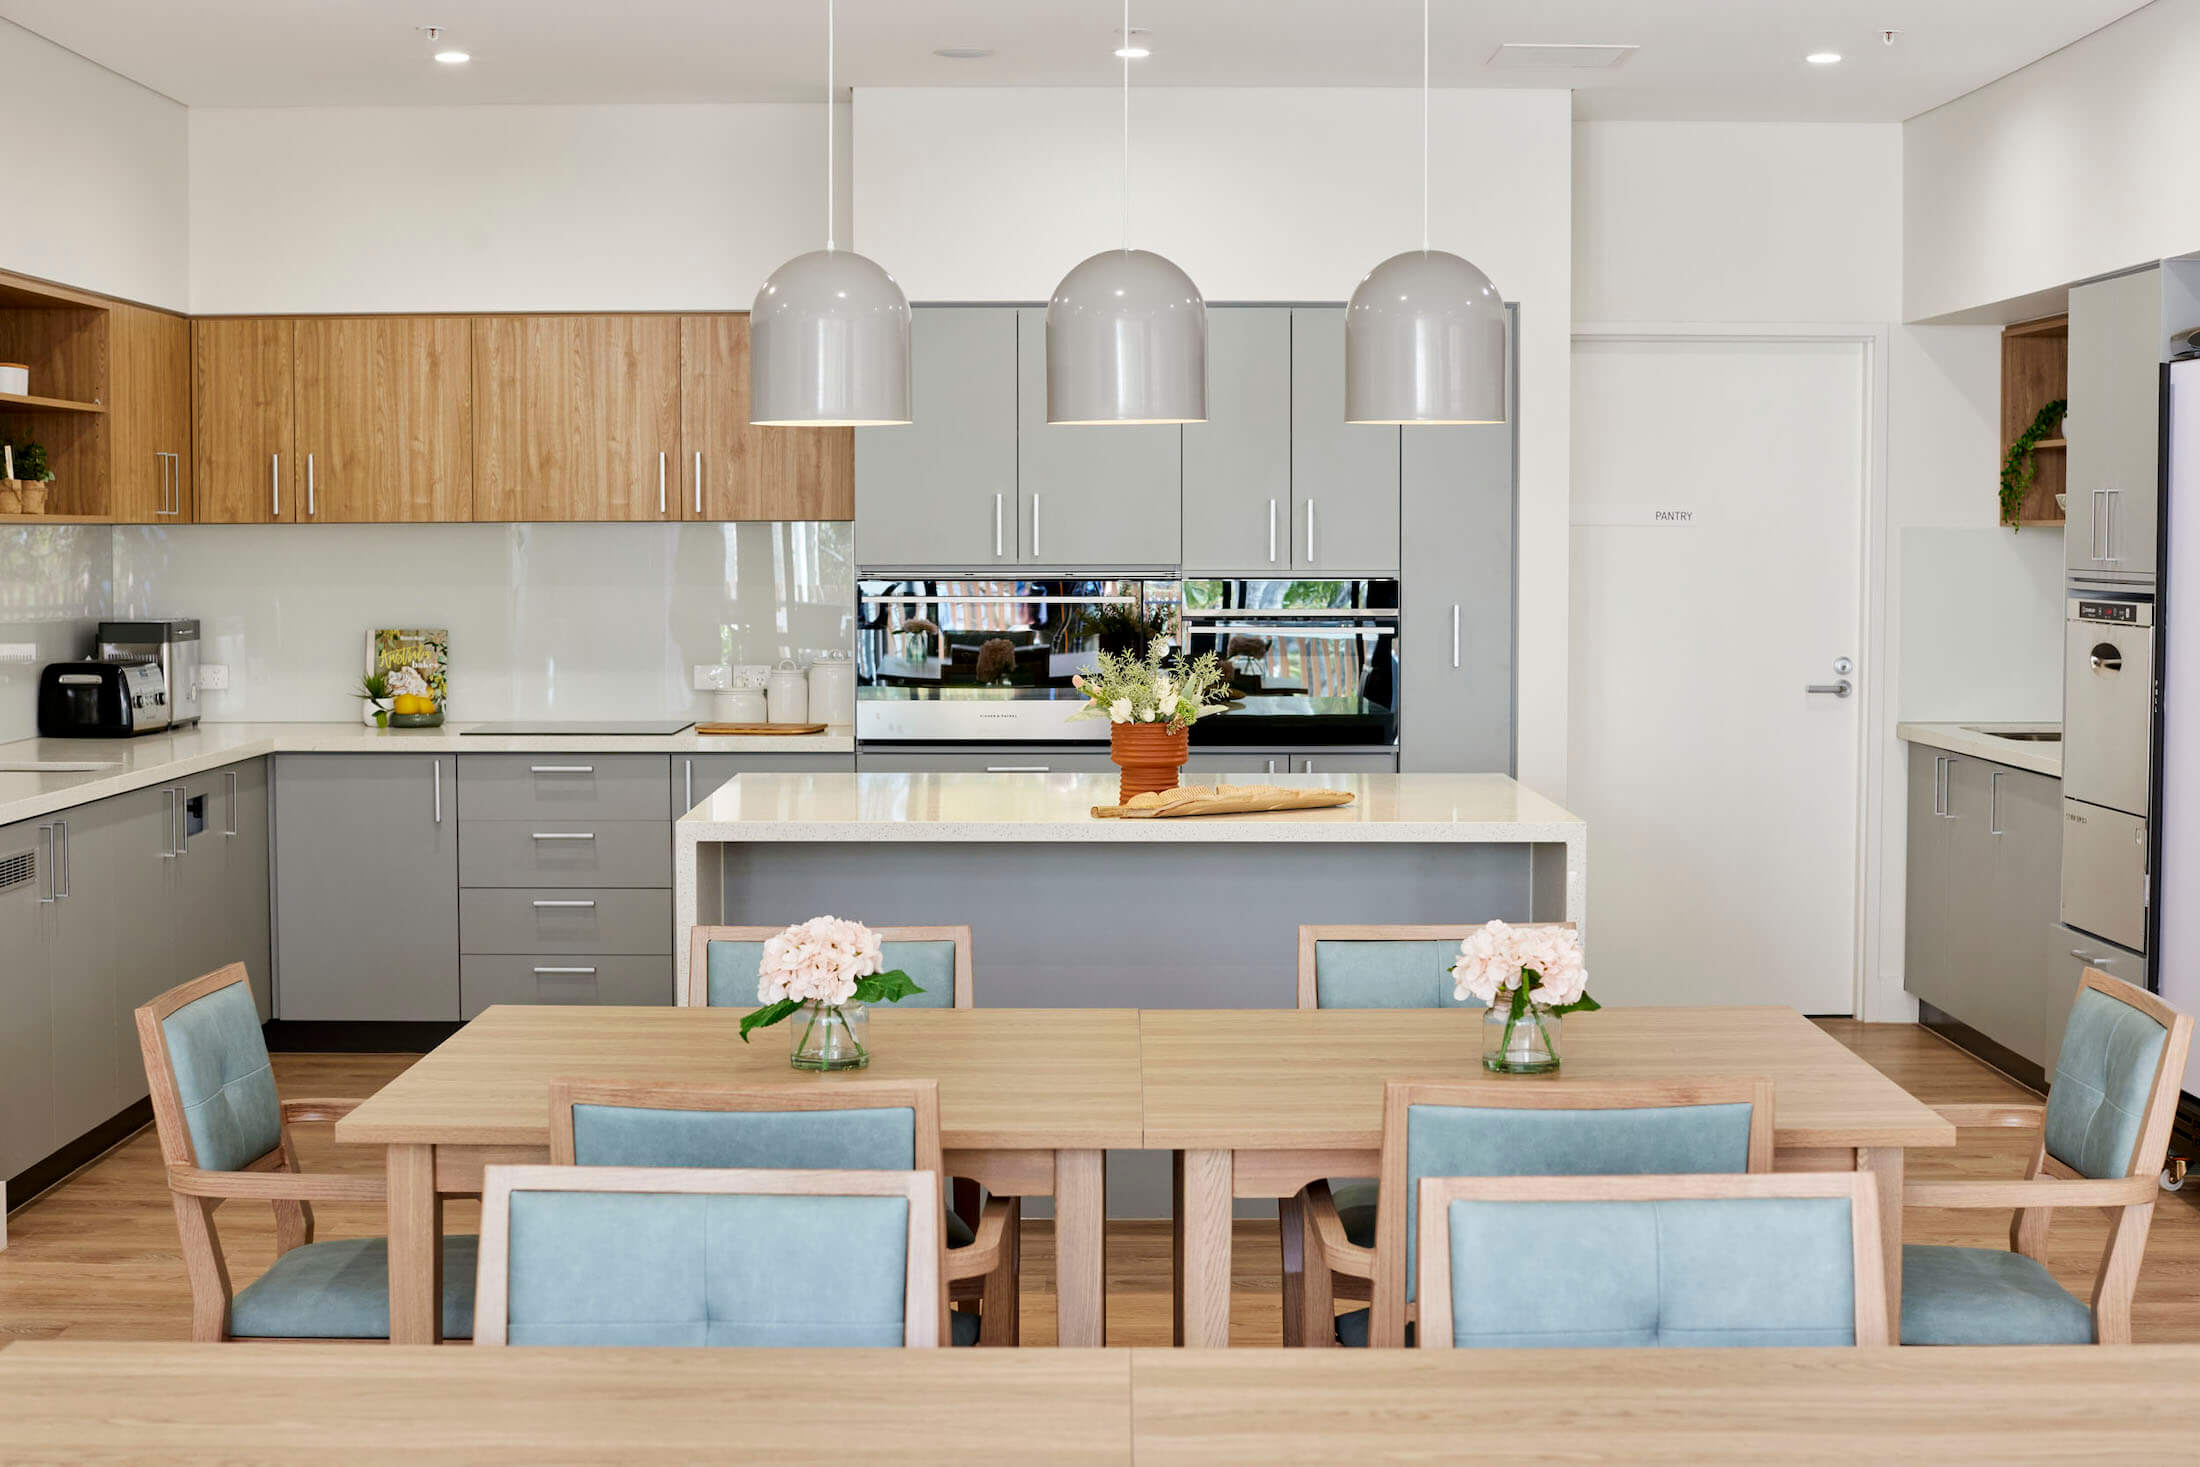 A new kitchen with grey pendant lights over an island bench, timber dining table in foreground